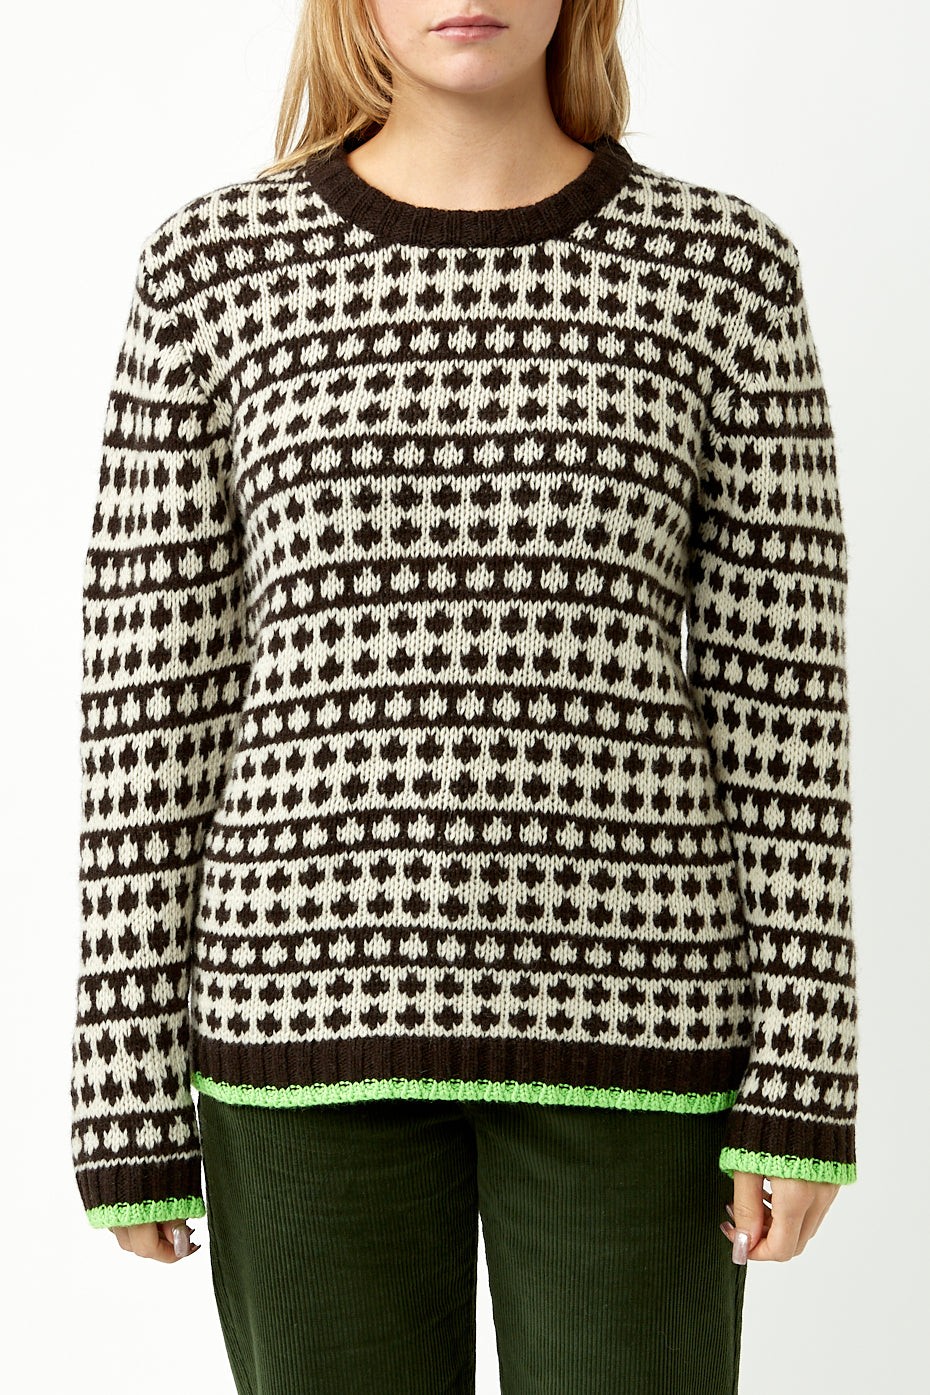 Mads Norgaard Black Coffee Winter White Recycled Kimilla Sweater